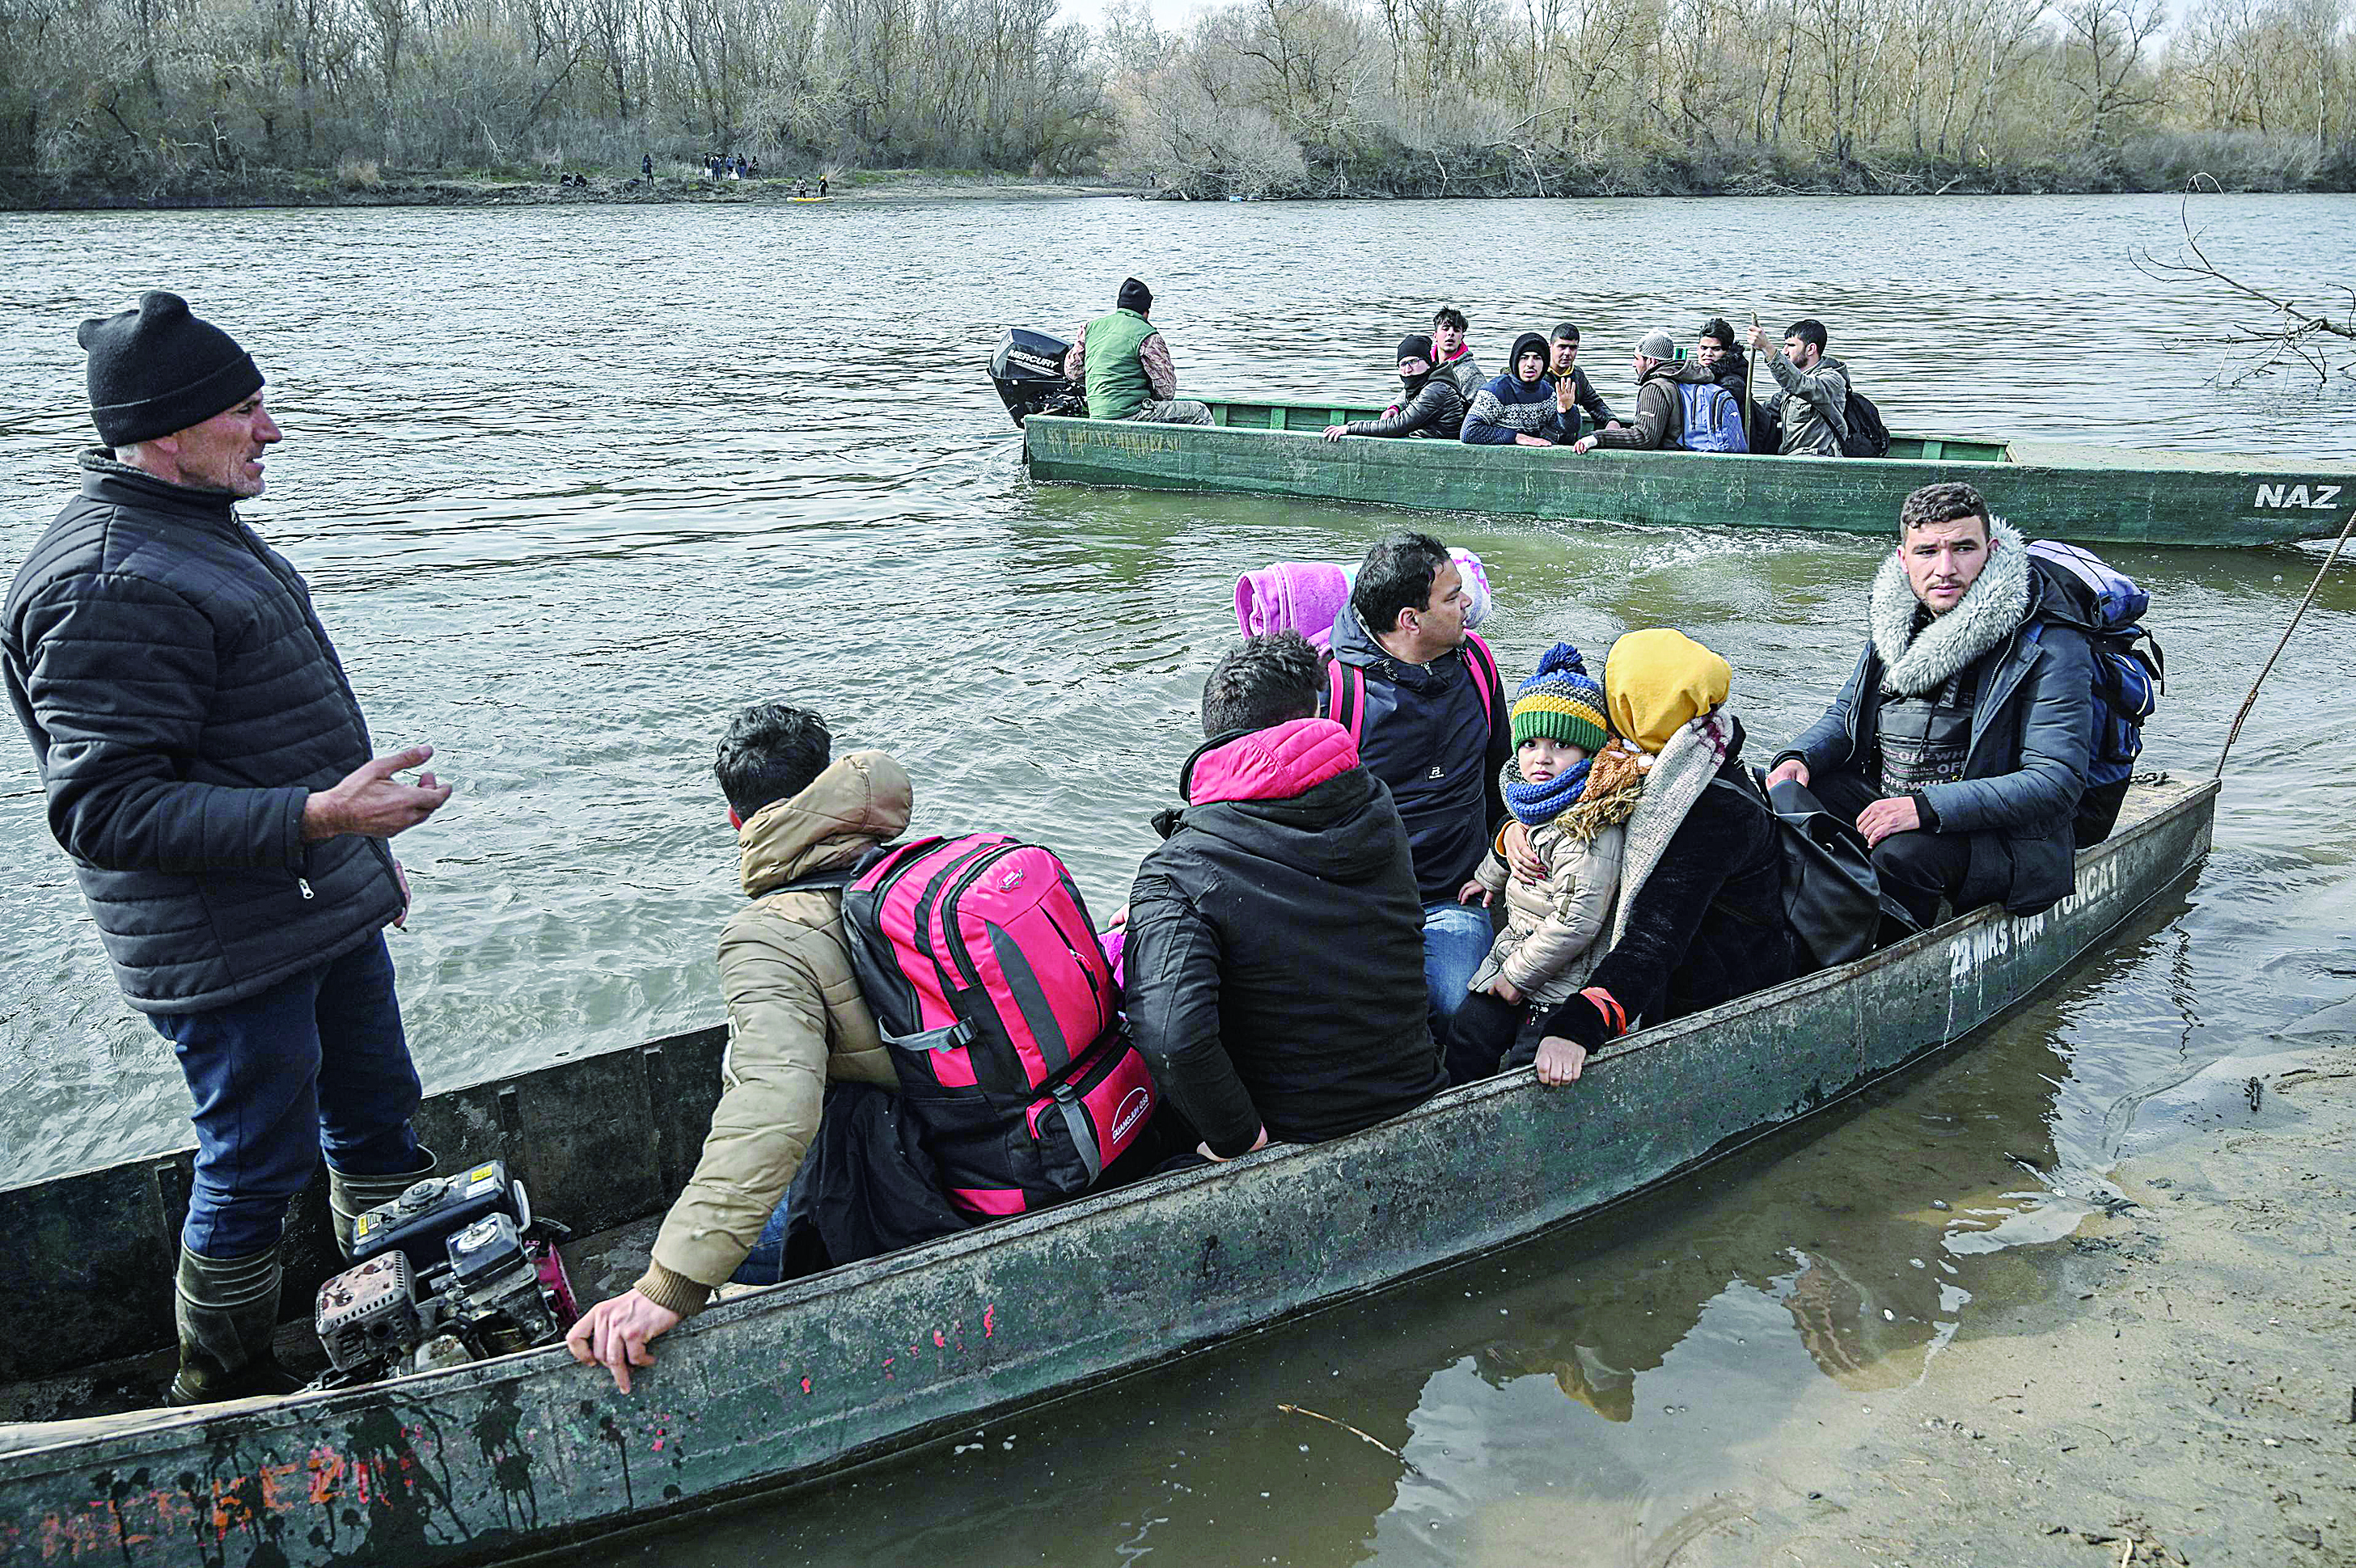 Migrants take boats near Edirne while other migrants wait at Greece side, as they attempt to enter Greece by crossing the Maritsa river, on March 1, 2020. - Thousands more migrants reached the Turkish border with Greece on March 1, 2020, AFP journalists said, after President threatened to let them cross into Europe. At least 2,000 people including women and children arrived on the morning from Istanbul and walked through a field towards the Pazarkule border gate, a correspondent said. The group included Afghans, Syrians and Iraqis. (Photo by Ozan KOSE / AFP)